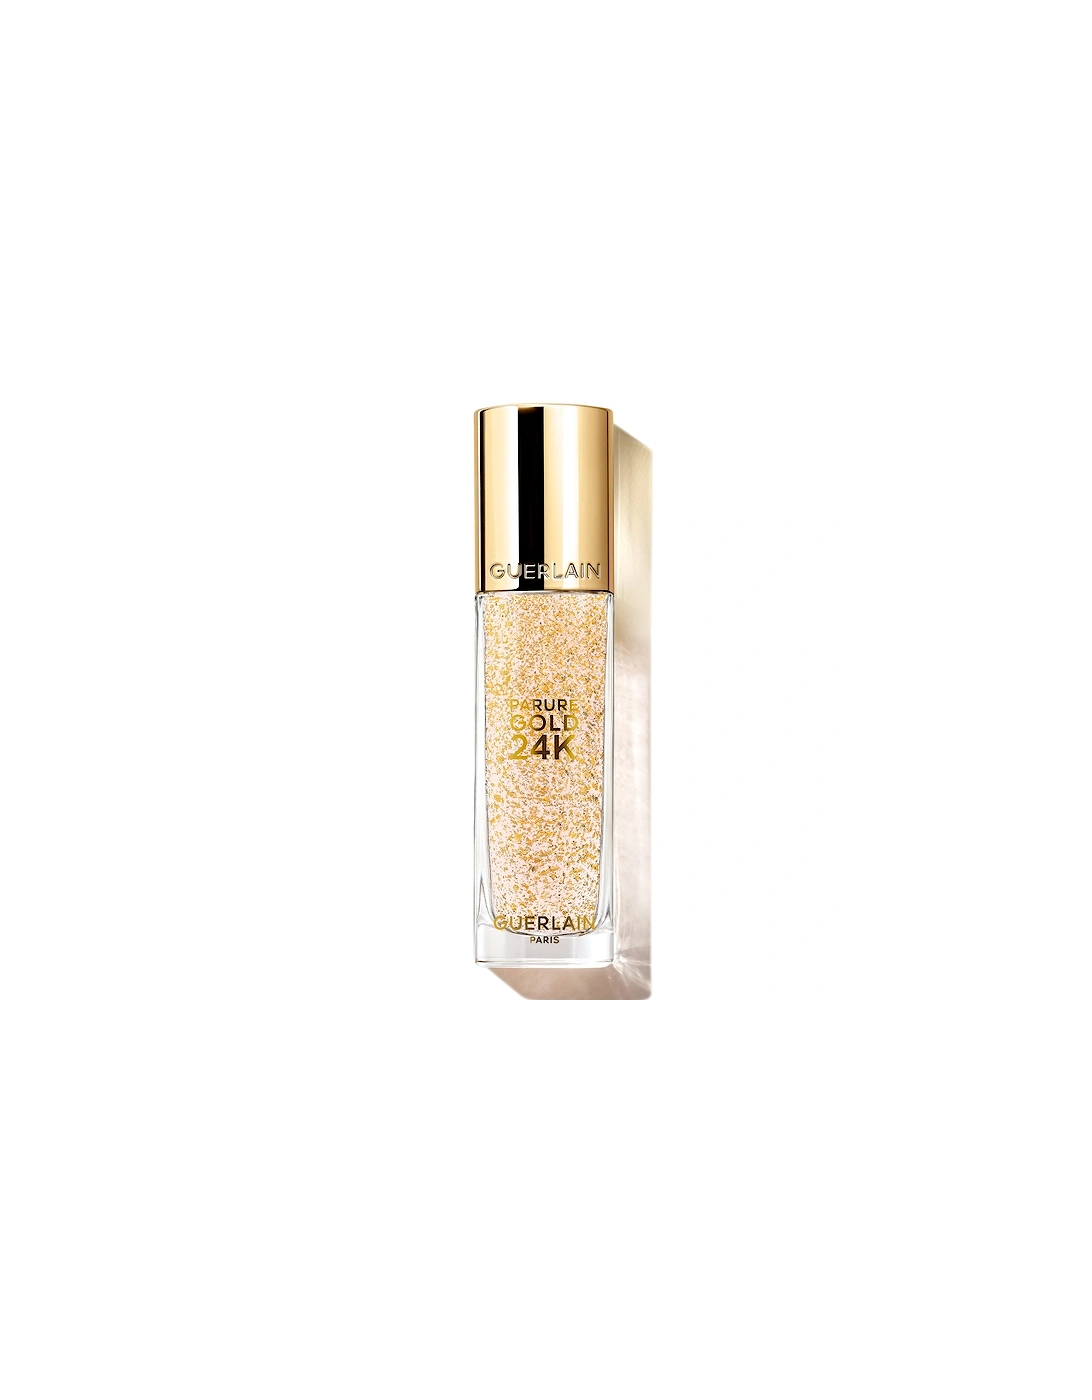 24H Hydration Parure Gold 24K Radiance Booster Perfection Primer - Pink Gold, 2 of 1